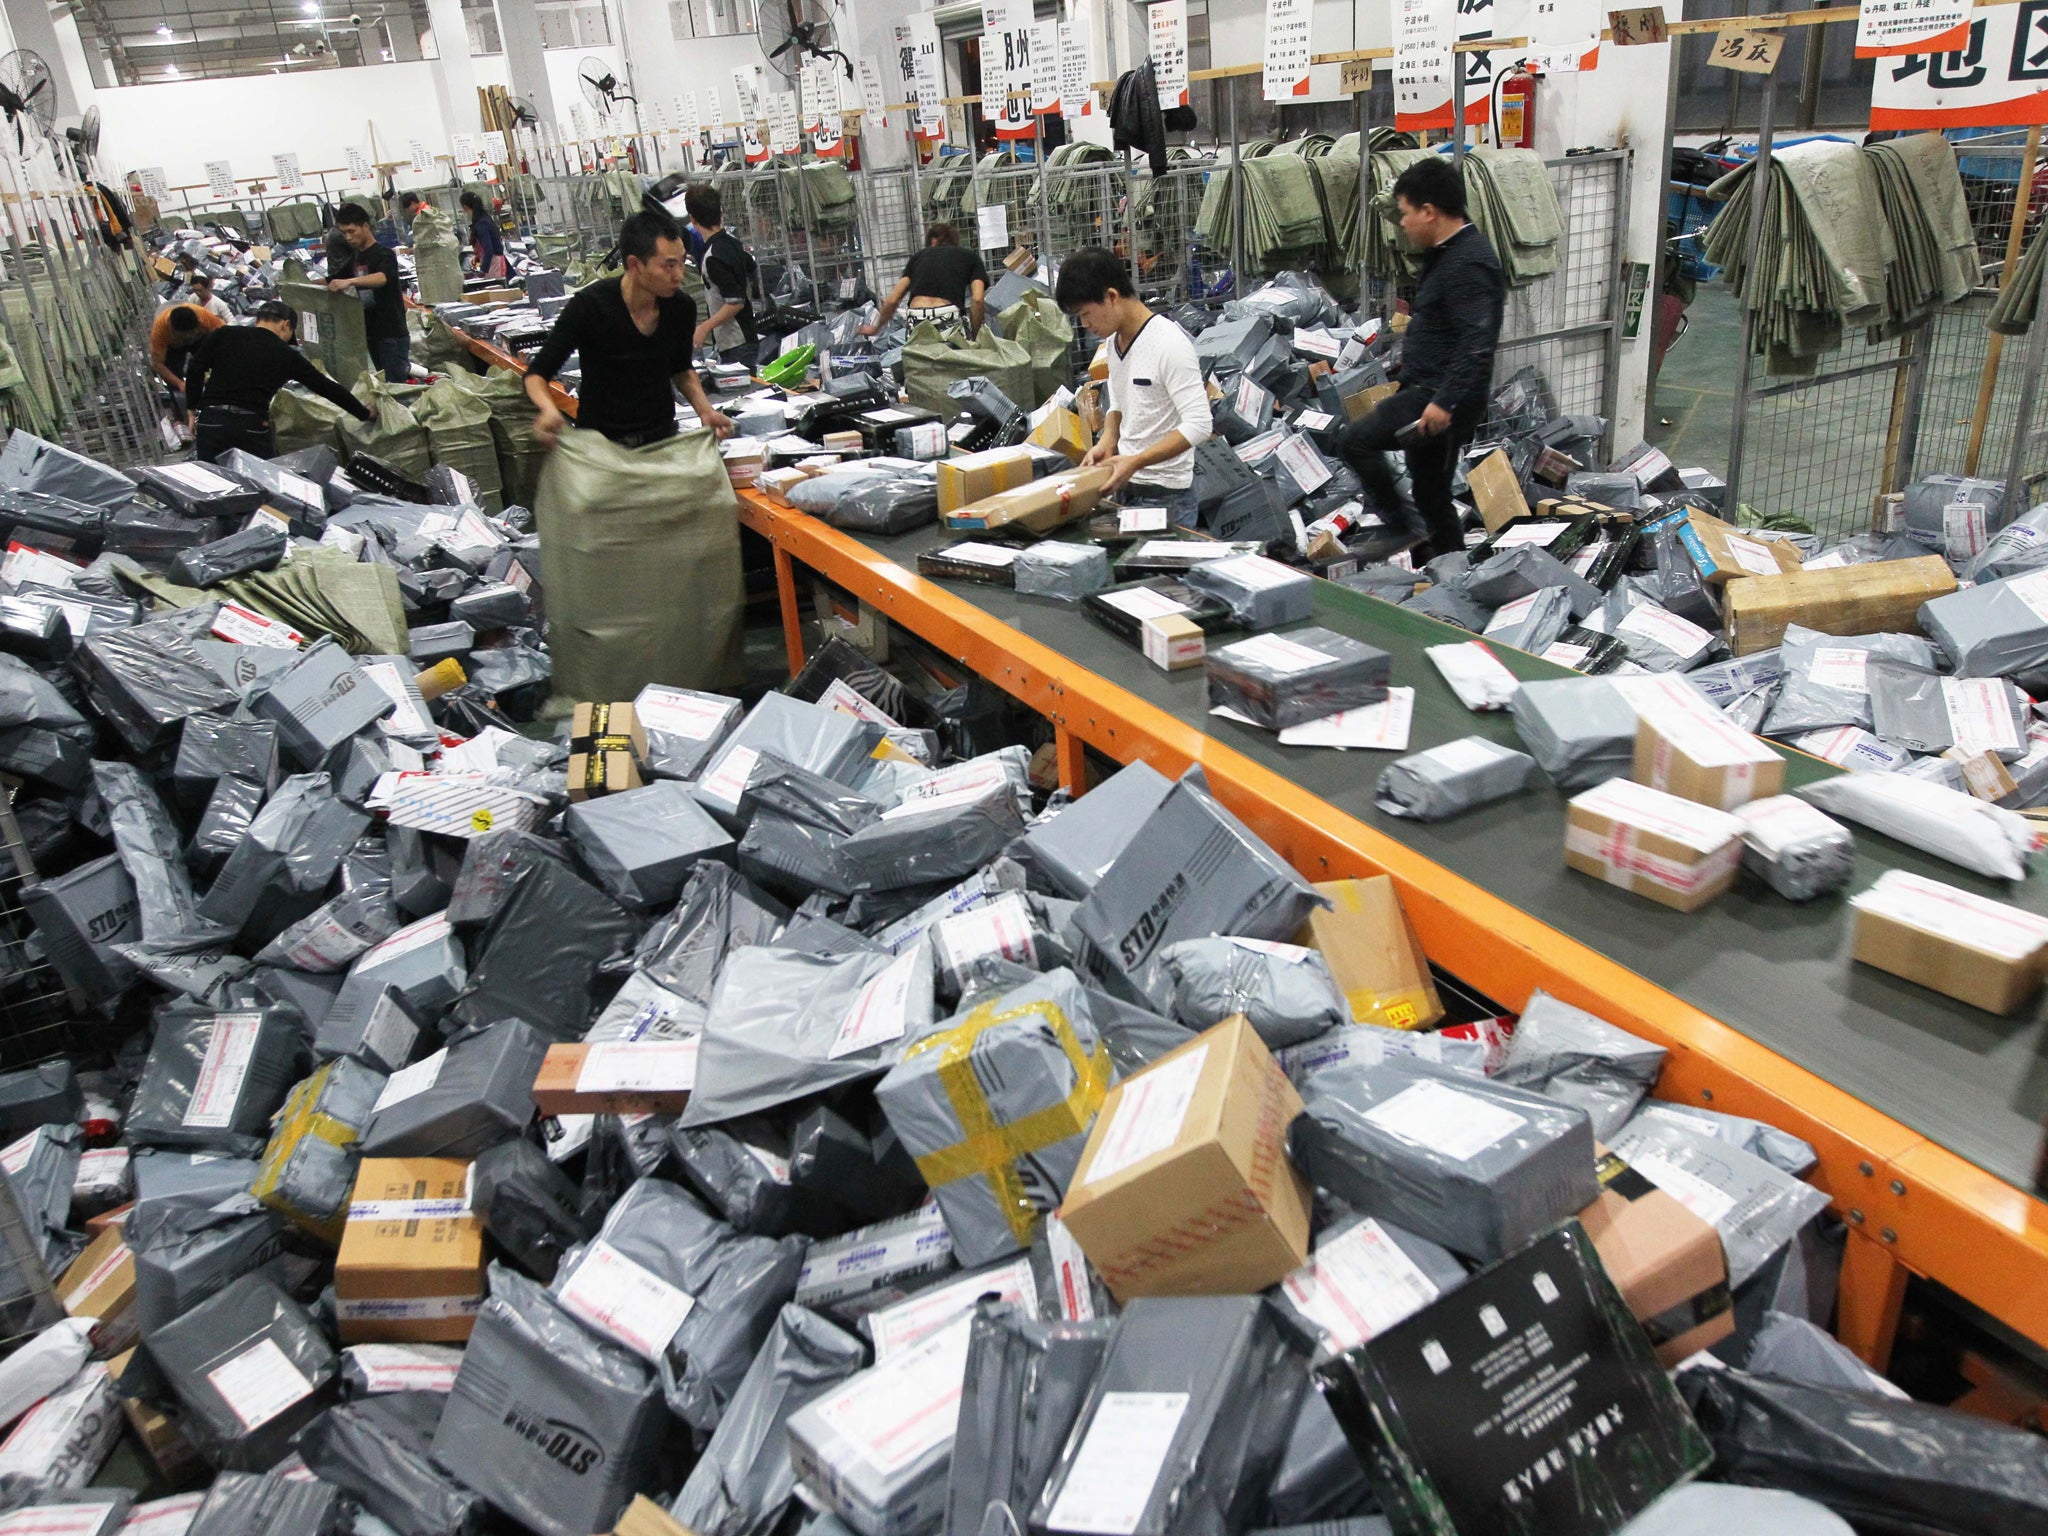 Express crew deal with express packages at assembly line on November 12, 2014 in Wenzhou, Zhejiang province of China. Online shopping websites offered massive discounts on Singles' Day (November 11) every year, which brings huge pressure to China's express delivery business during that day.